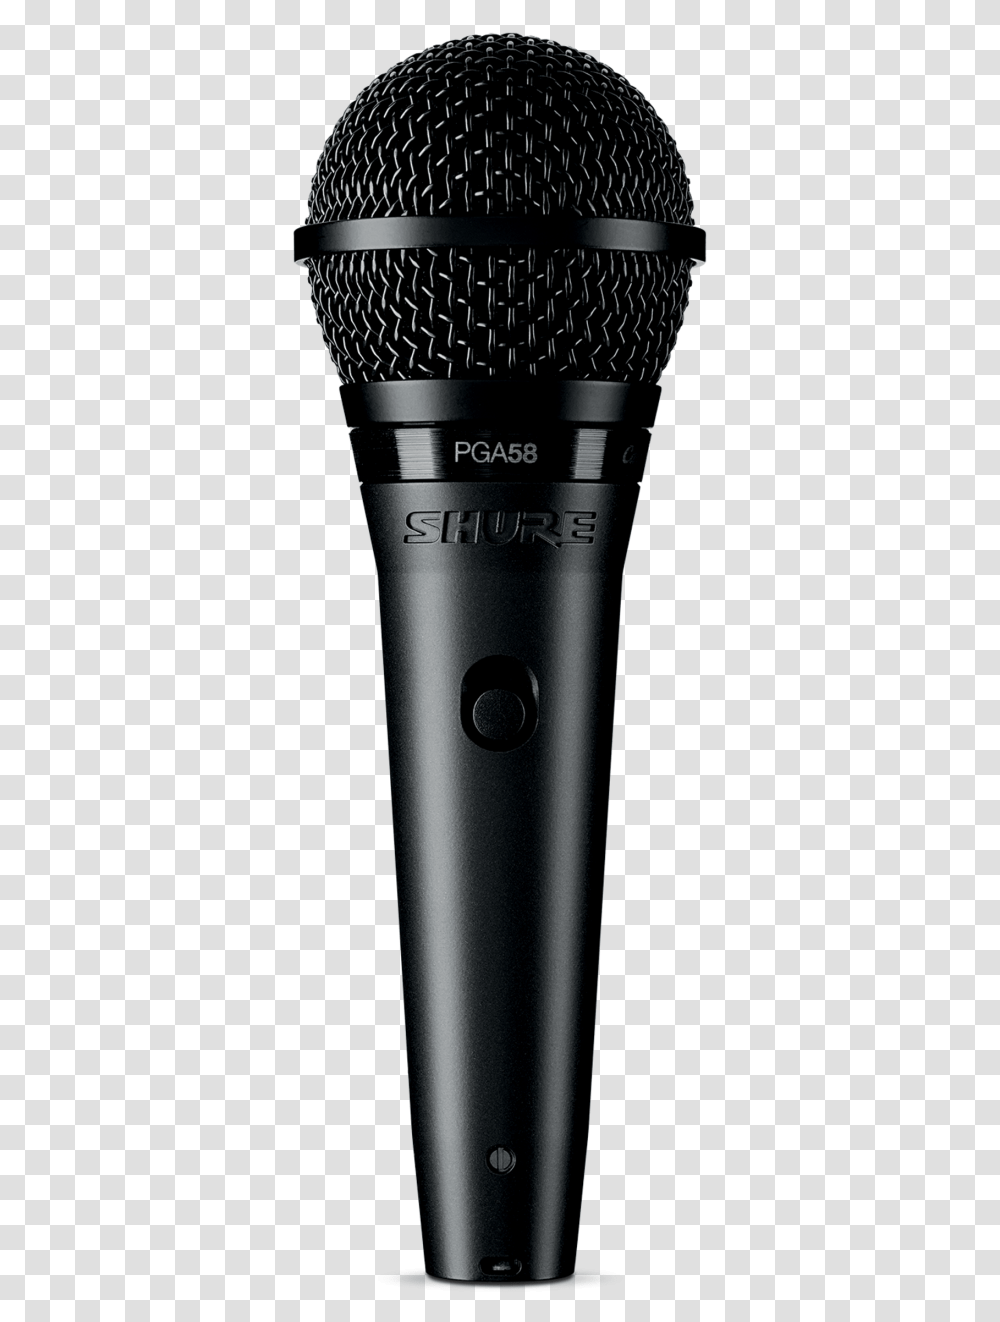 Shure Pga58 Cardioid Handheld Microphone Microphone, Electrical Device, Steel, Beer, Alcohol Transparent Png